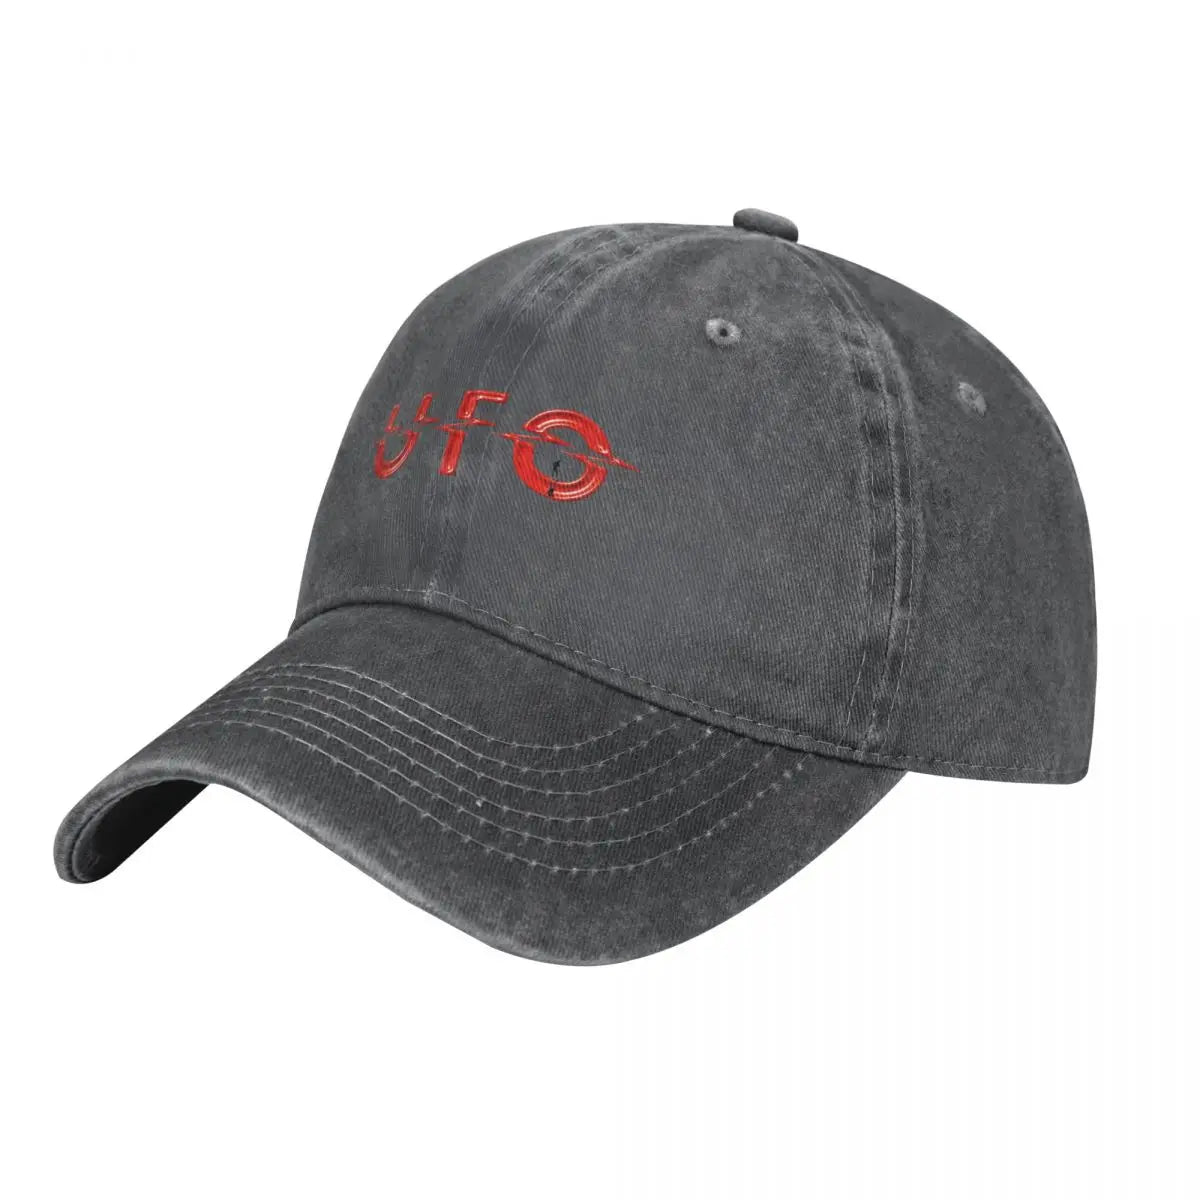 UFO are an English rock band that was formed in London in 1968 Rock Bottom Hat Ball Cap Girl's Men's - Lizard Vigilante